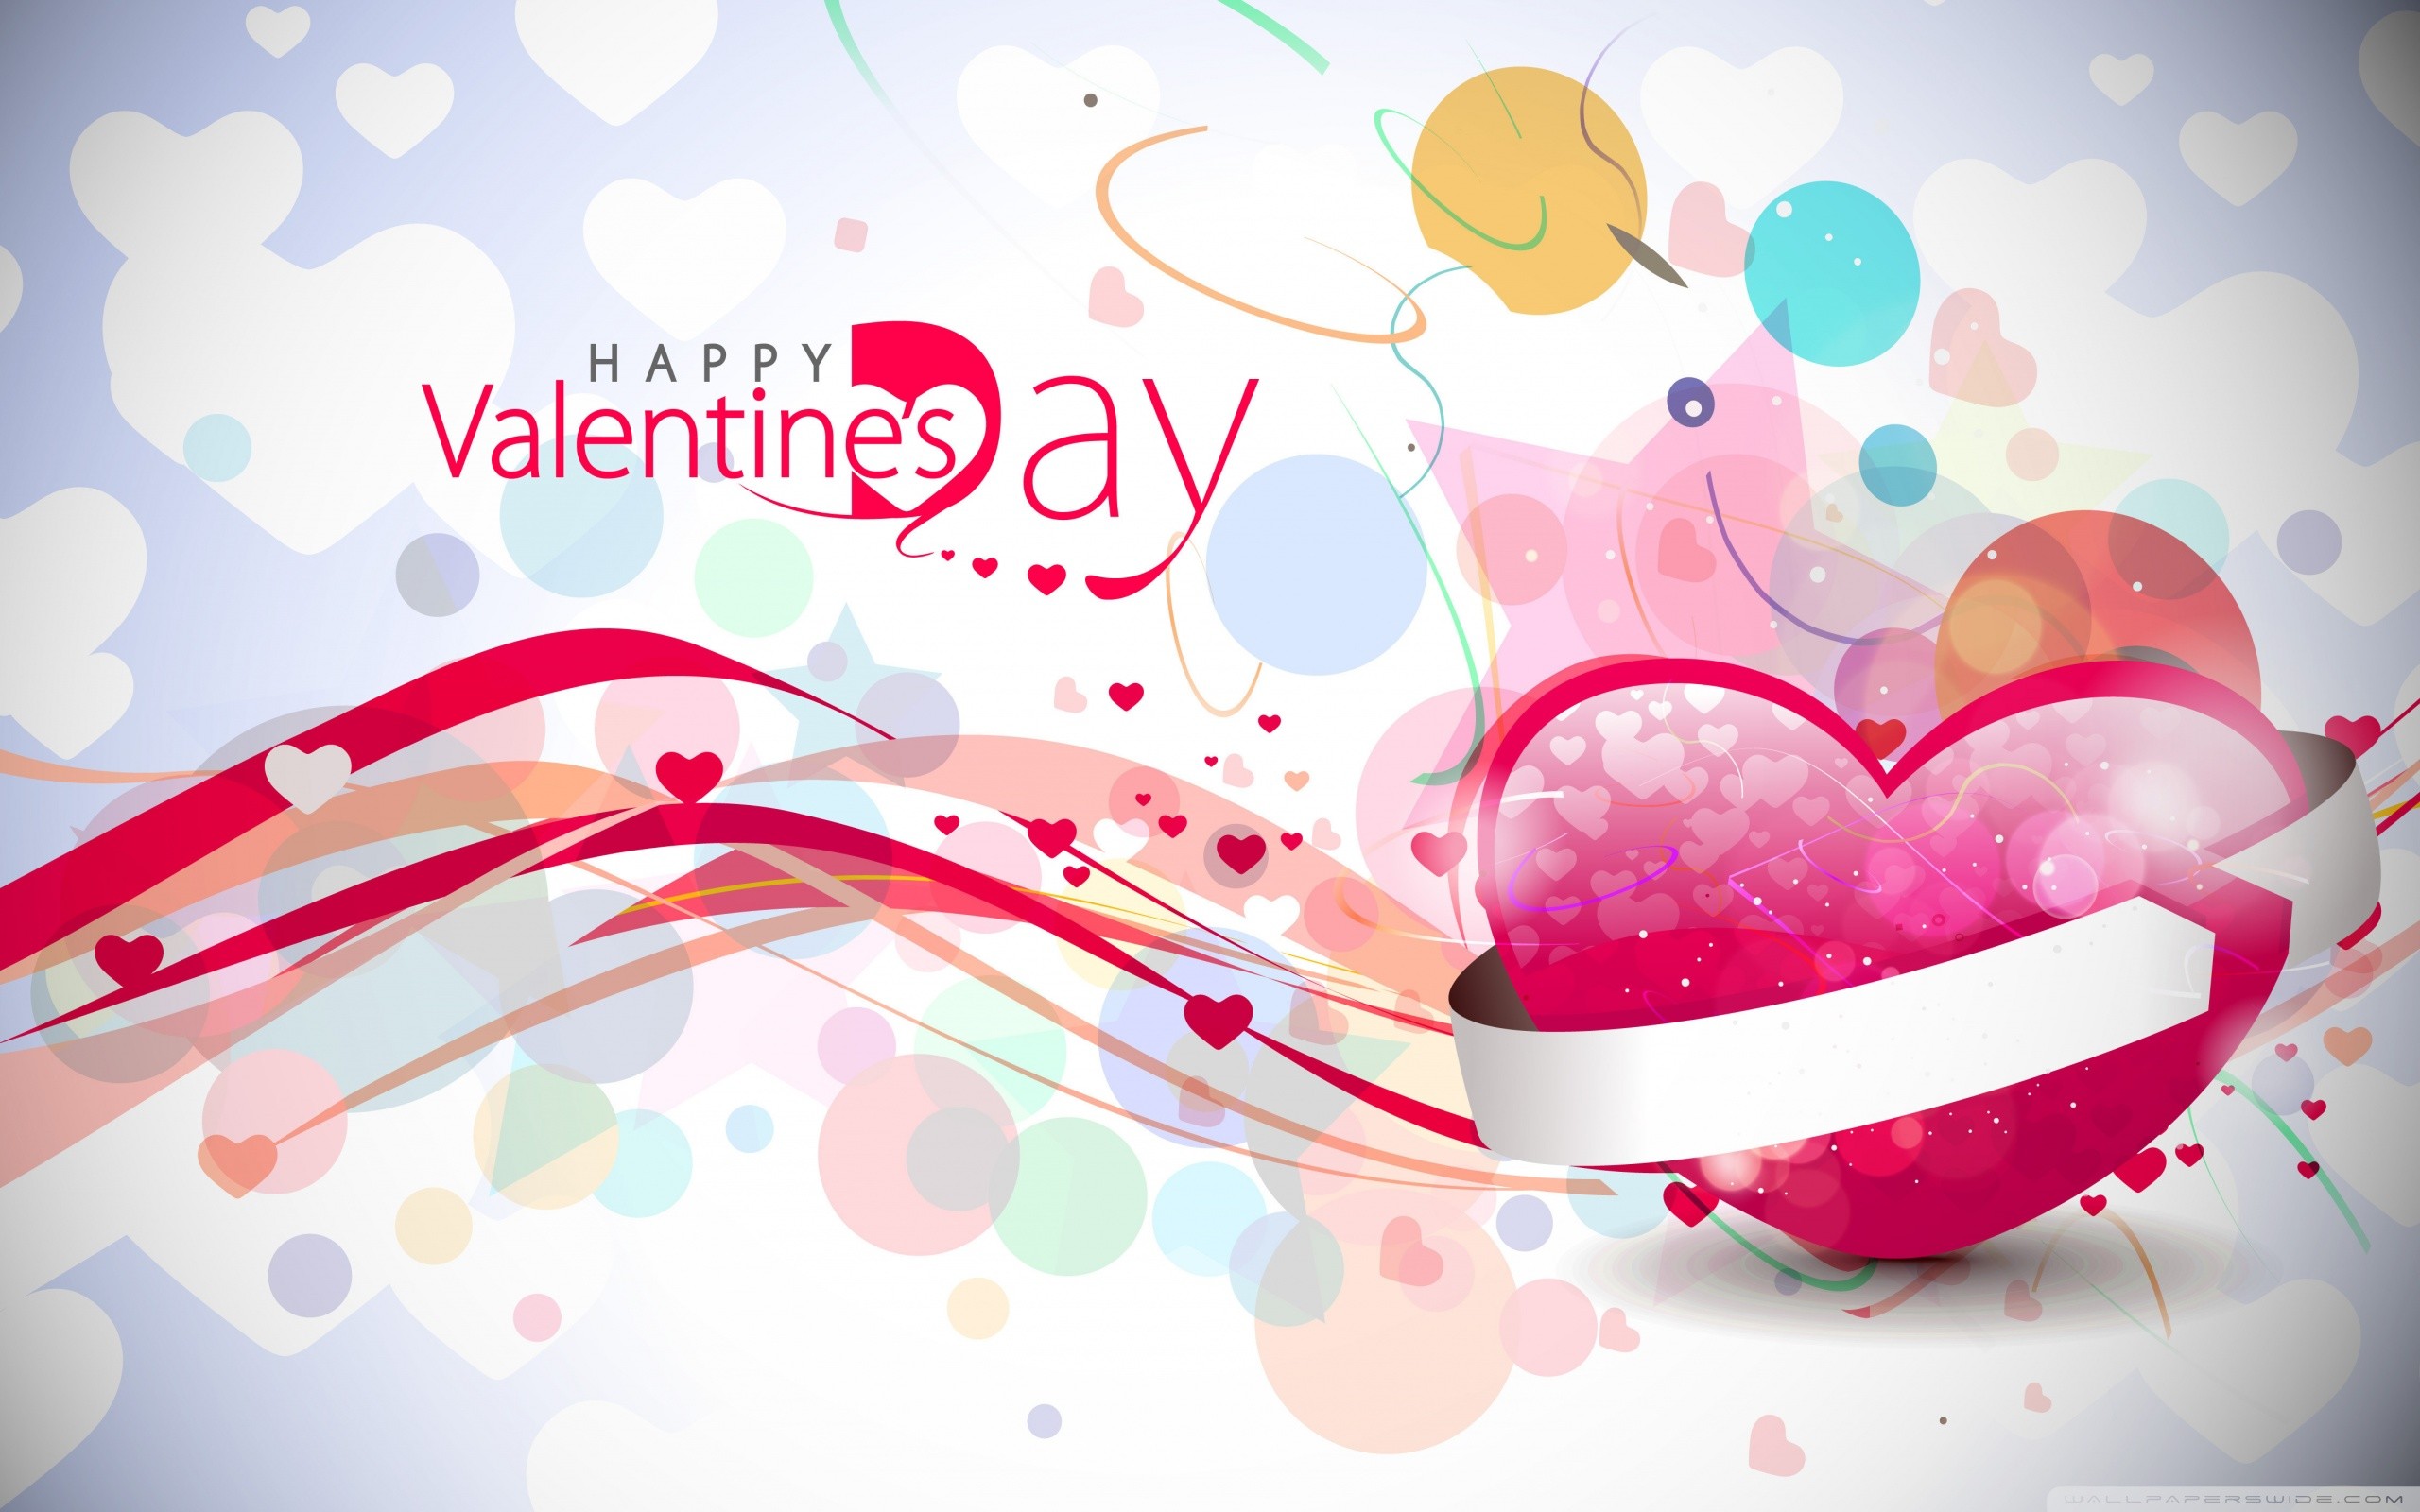 2560x1600 Valentines day special hd wallpaper for oppo phones | Laptop Wallpapers |  Pinterest | Hd wallpaper and Romantic couples